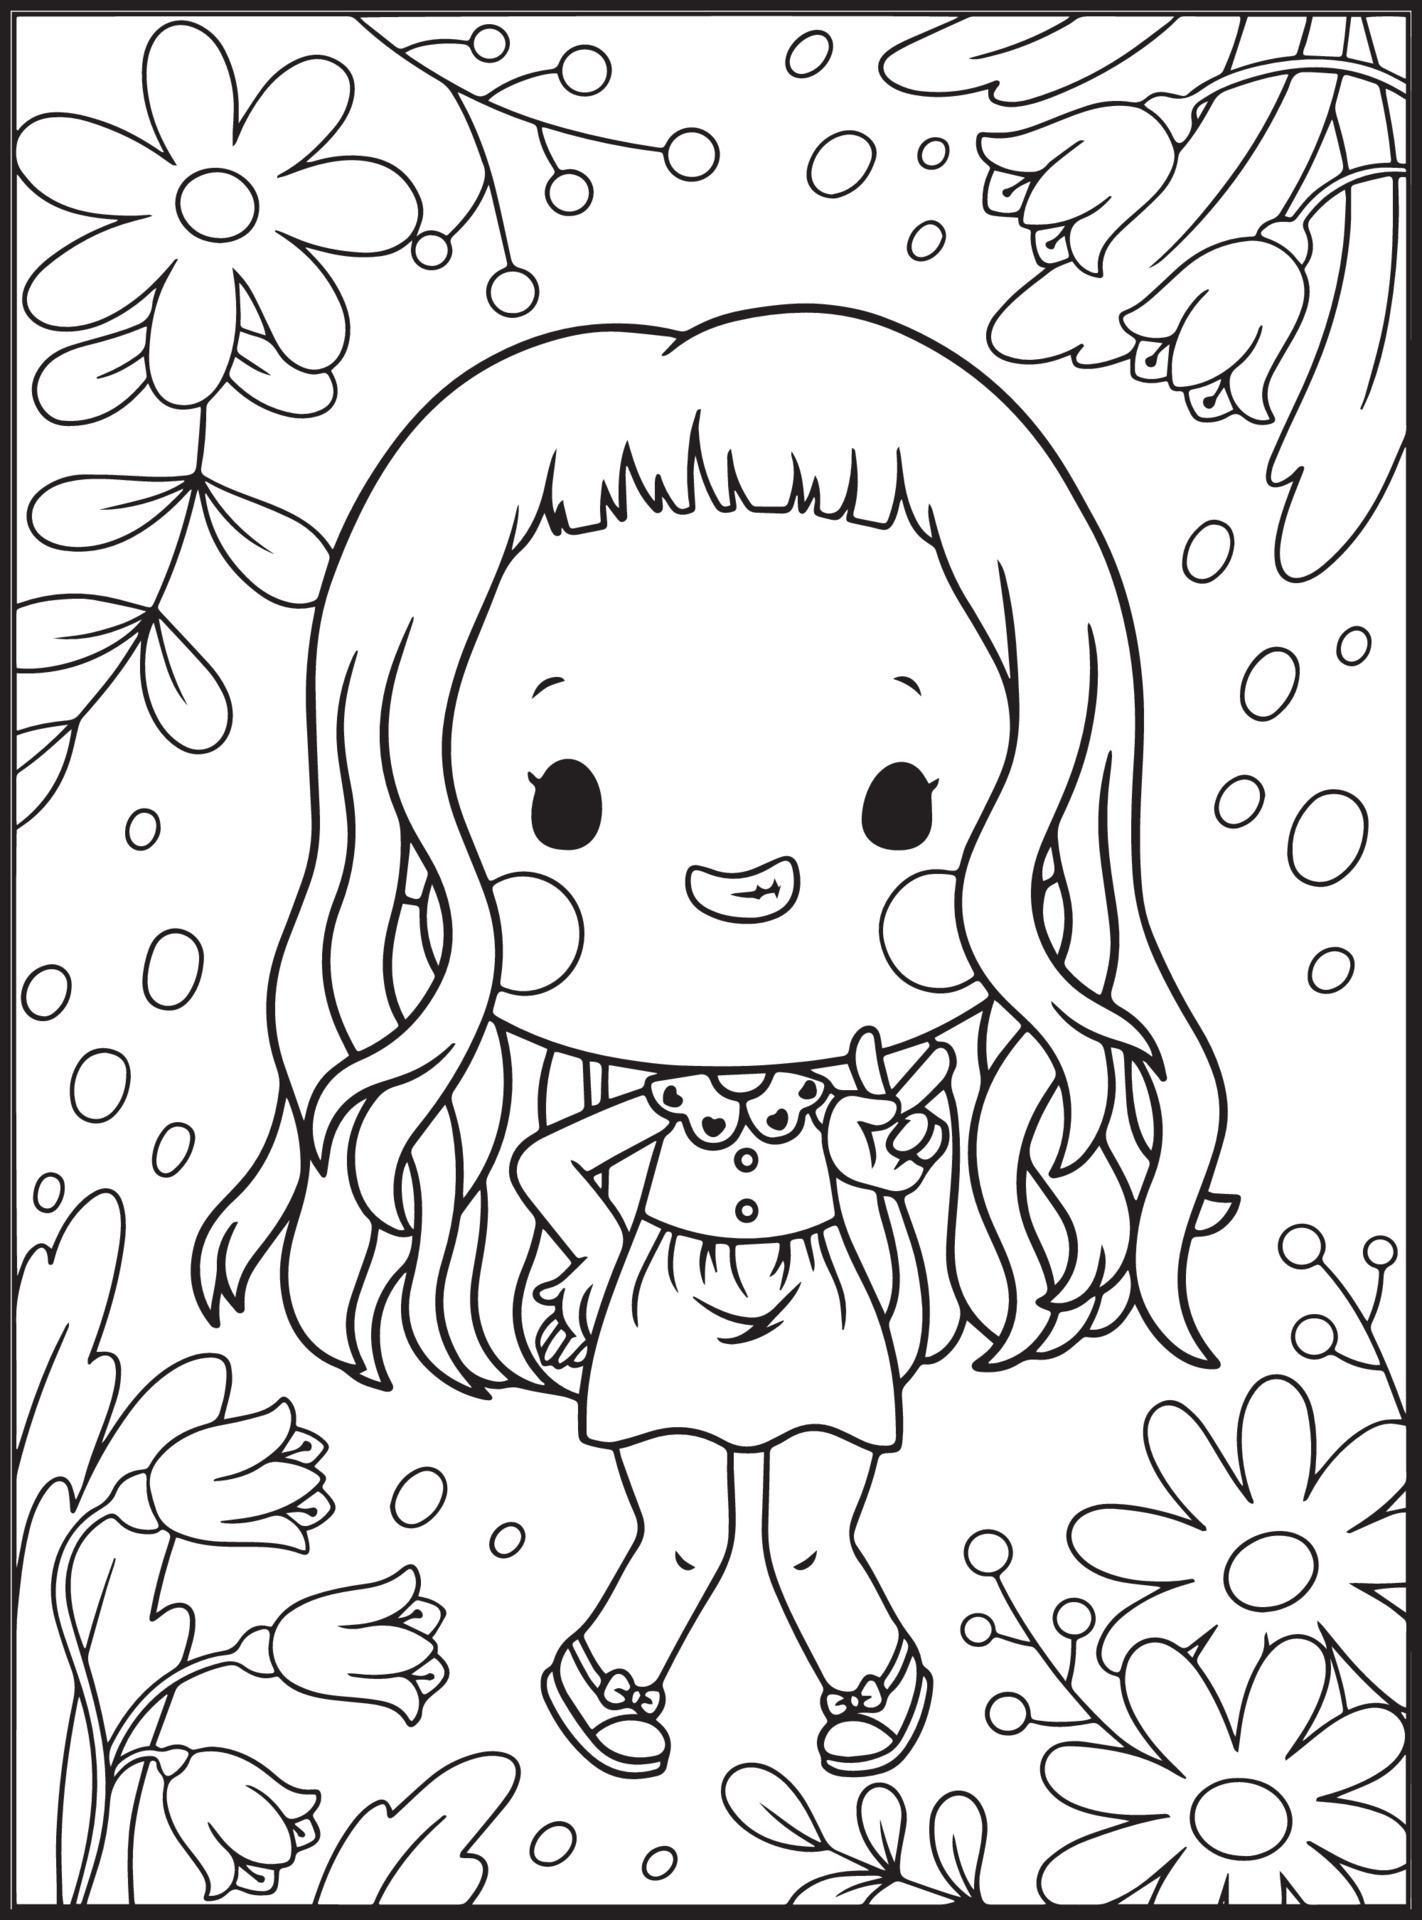 https://static.vecteezy.com/system/resources/previews/017/043/476/original/cute-girls-coloring-pages-for-kids-vector.jpg